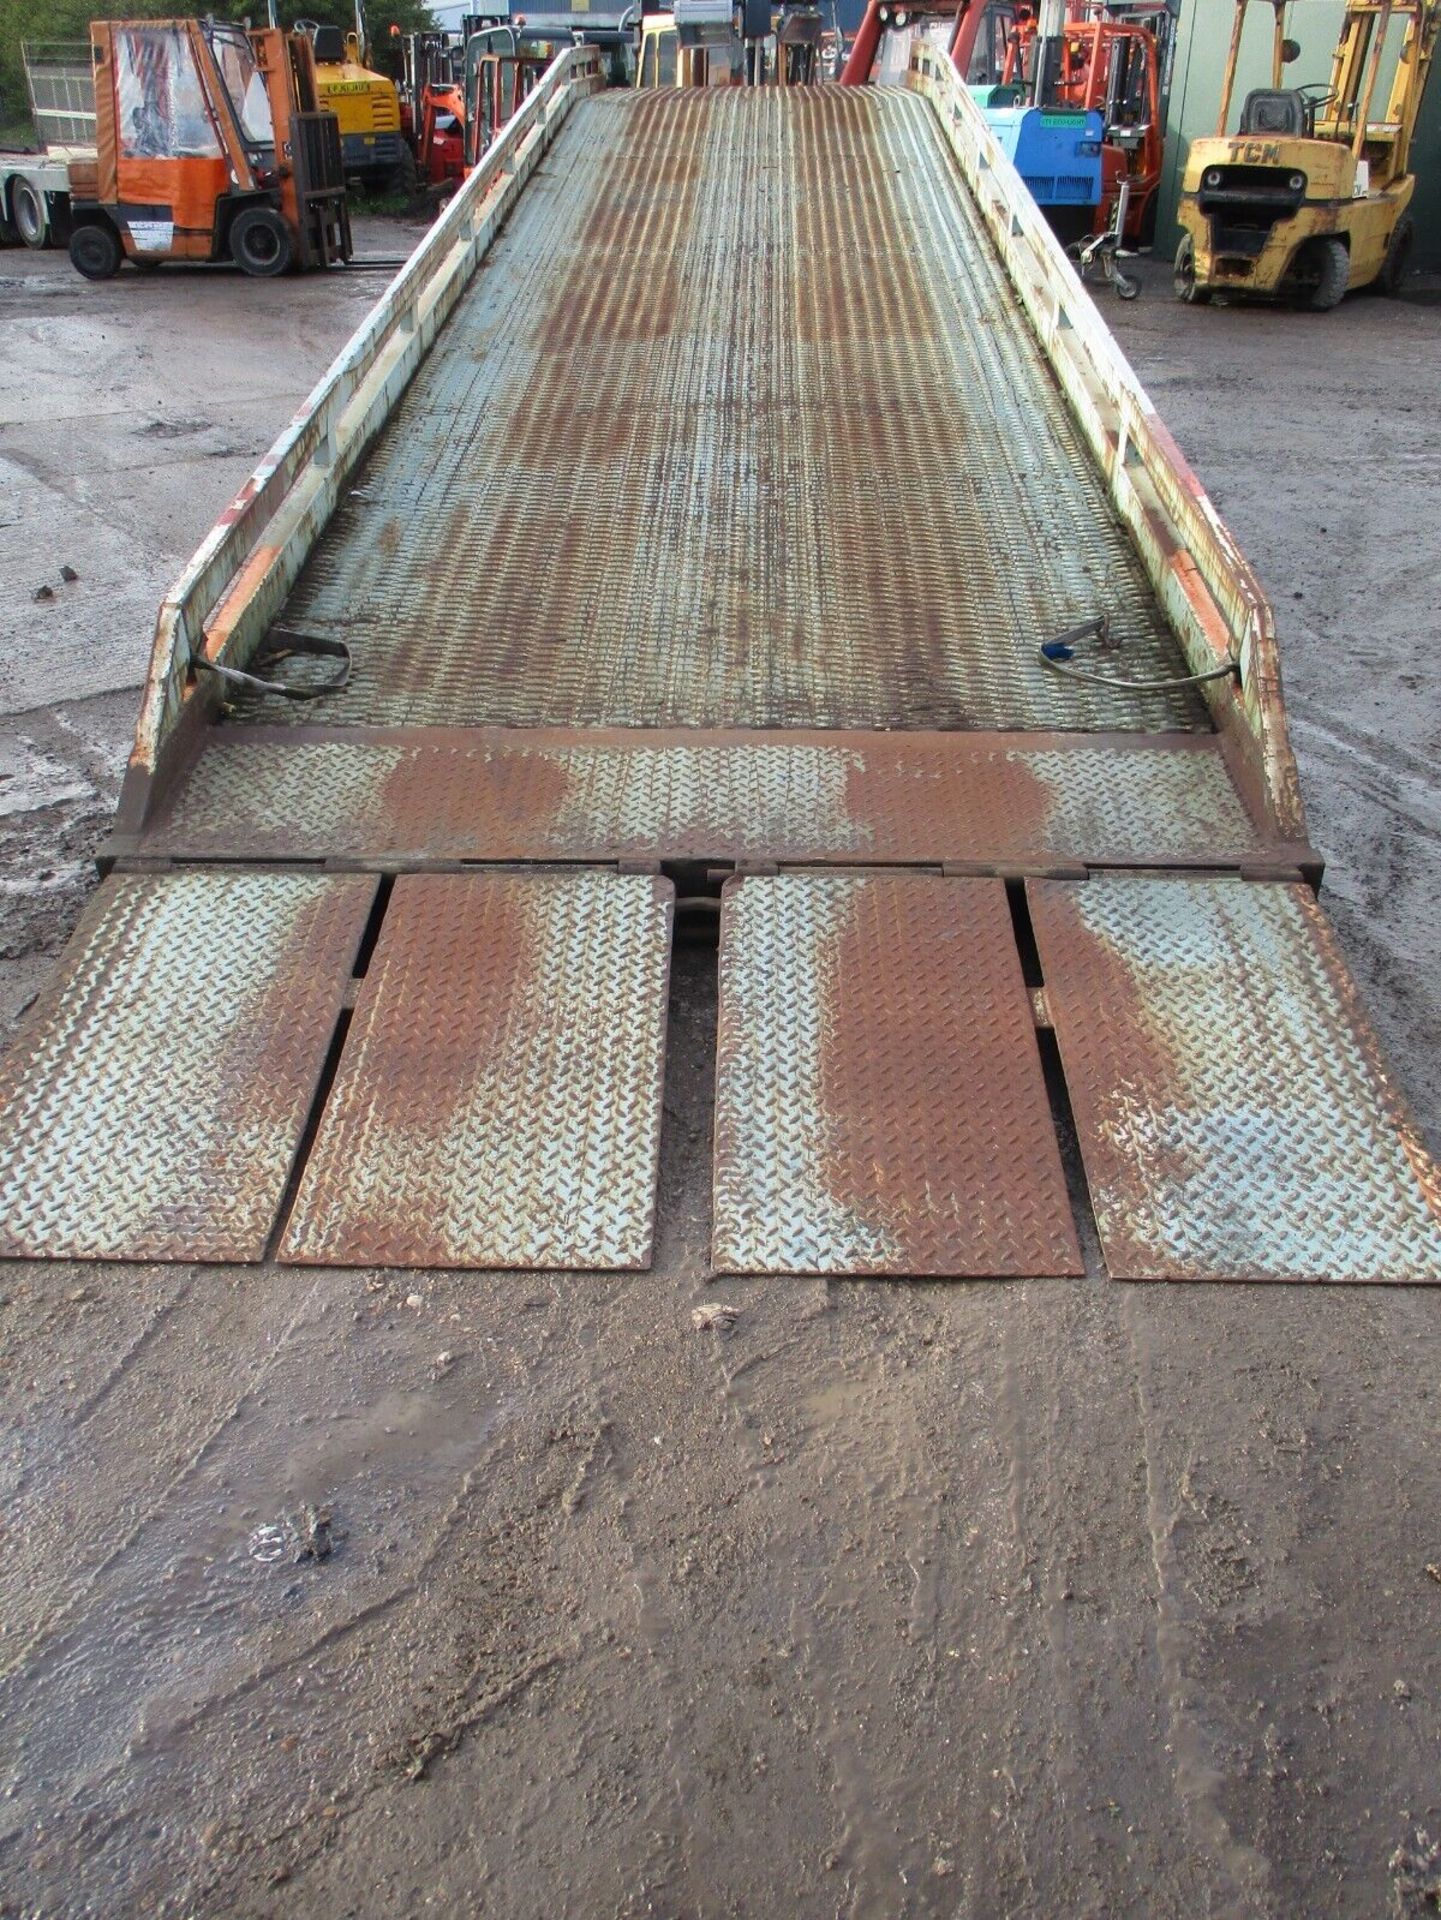 THORWORLD CONTAINER LOADING RAMP 10 TON CAPACITY - Image 6 of 10